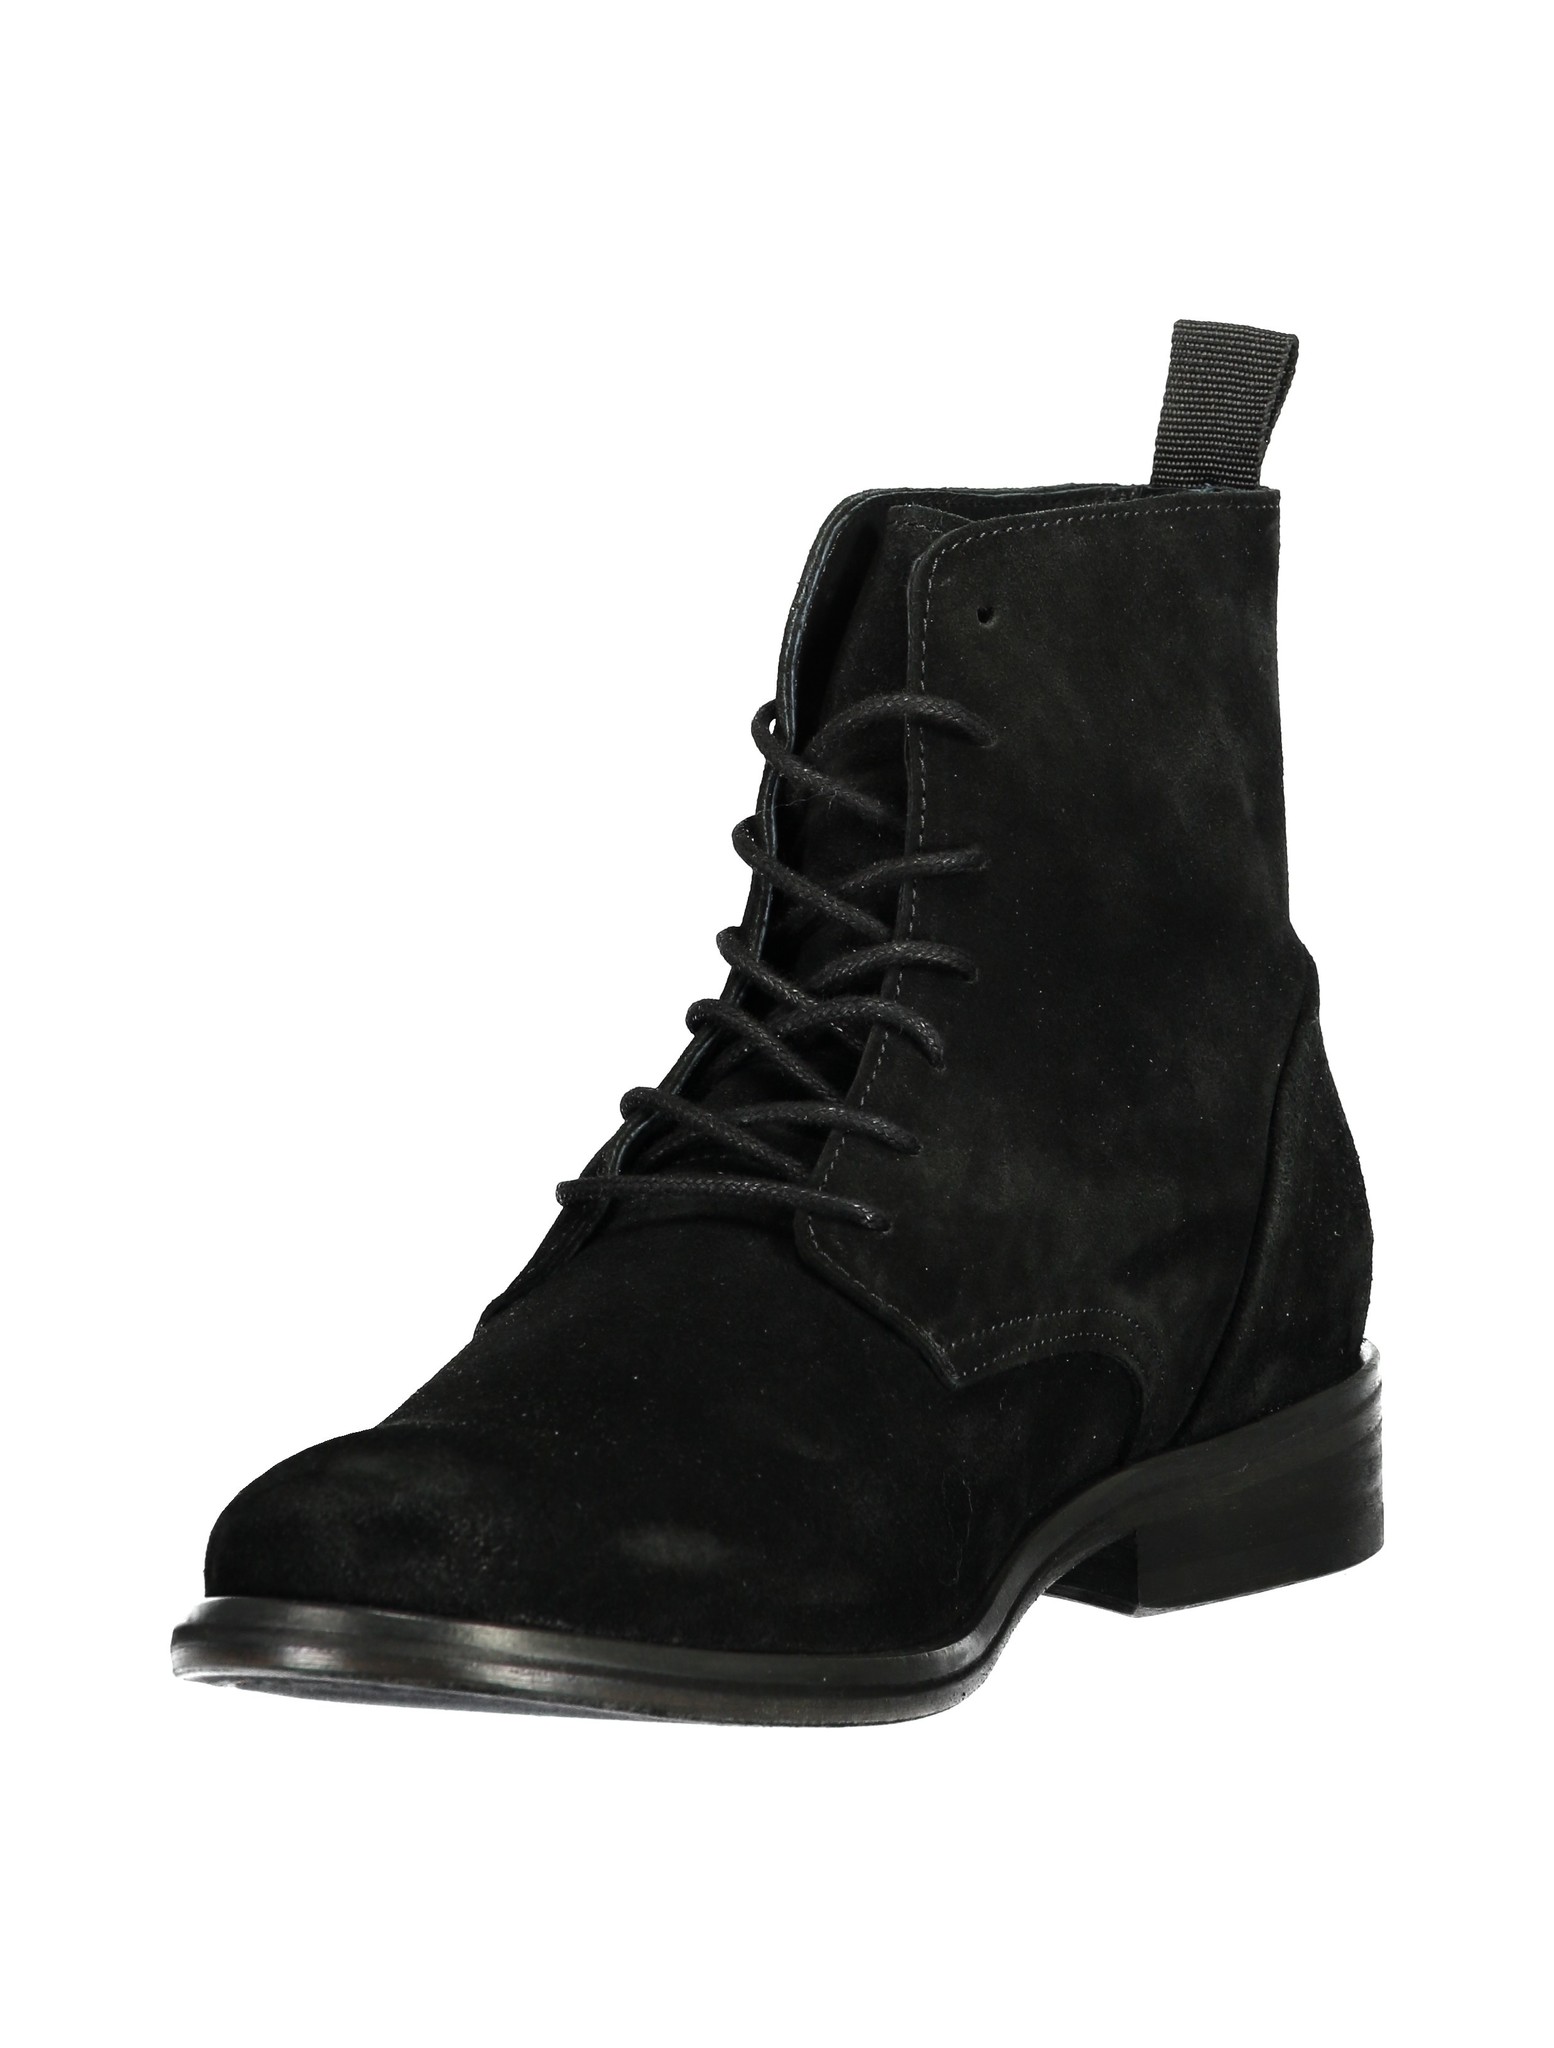 Suede Lace Up Boots: 60-91507 - LINDBERGH